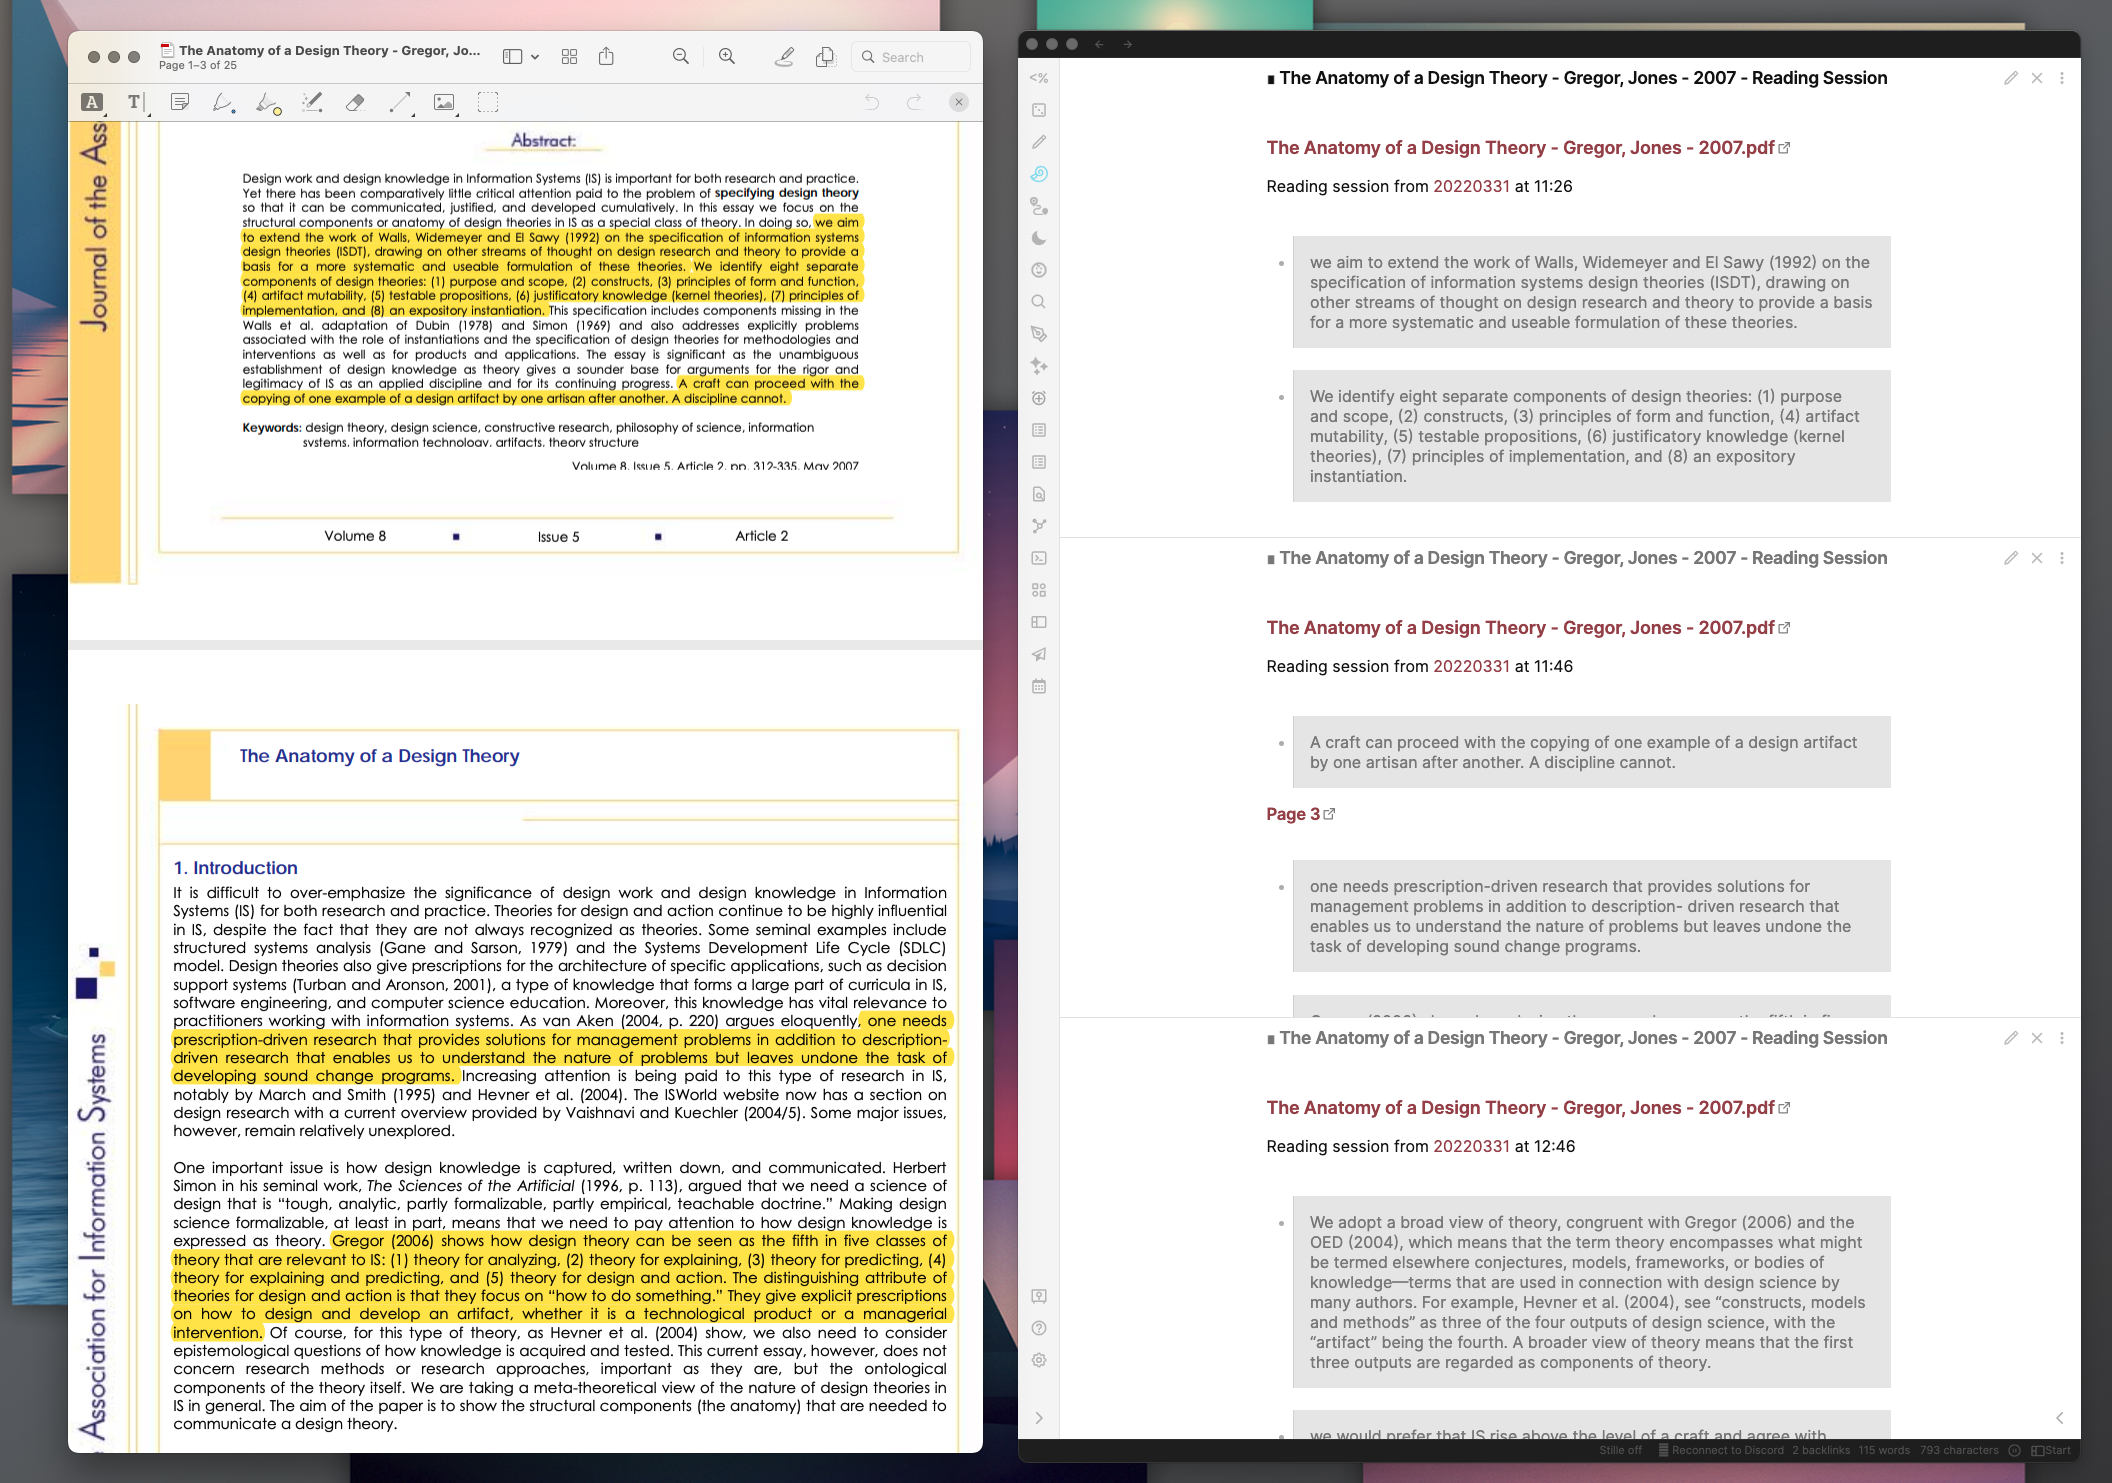 An example annotated PDF on the left, and some samples of extracted reading sessions from that PDF on the right, viewed in Obsidian.